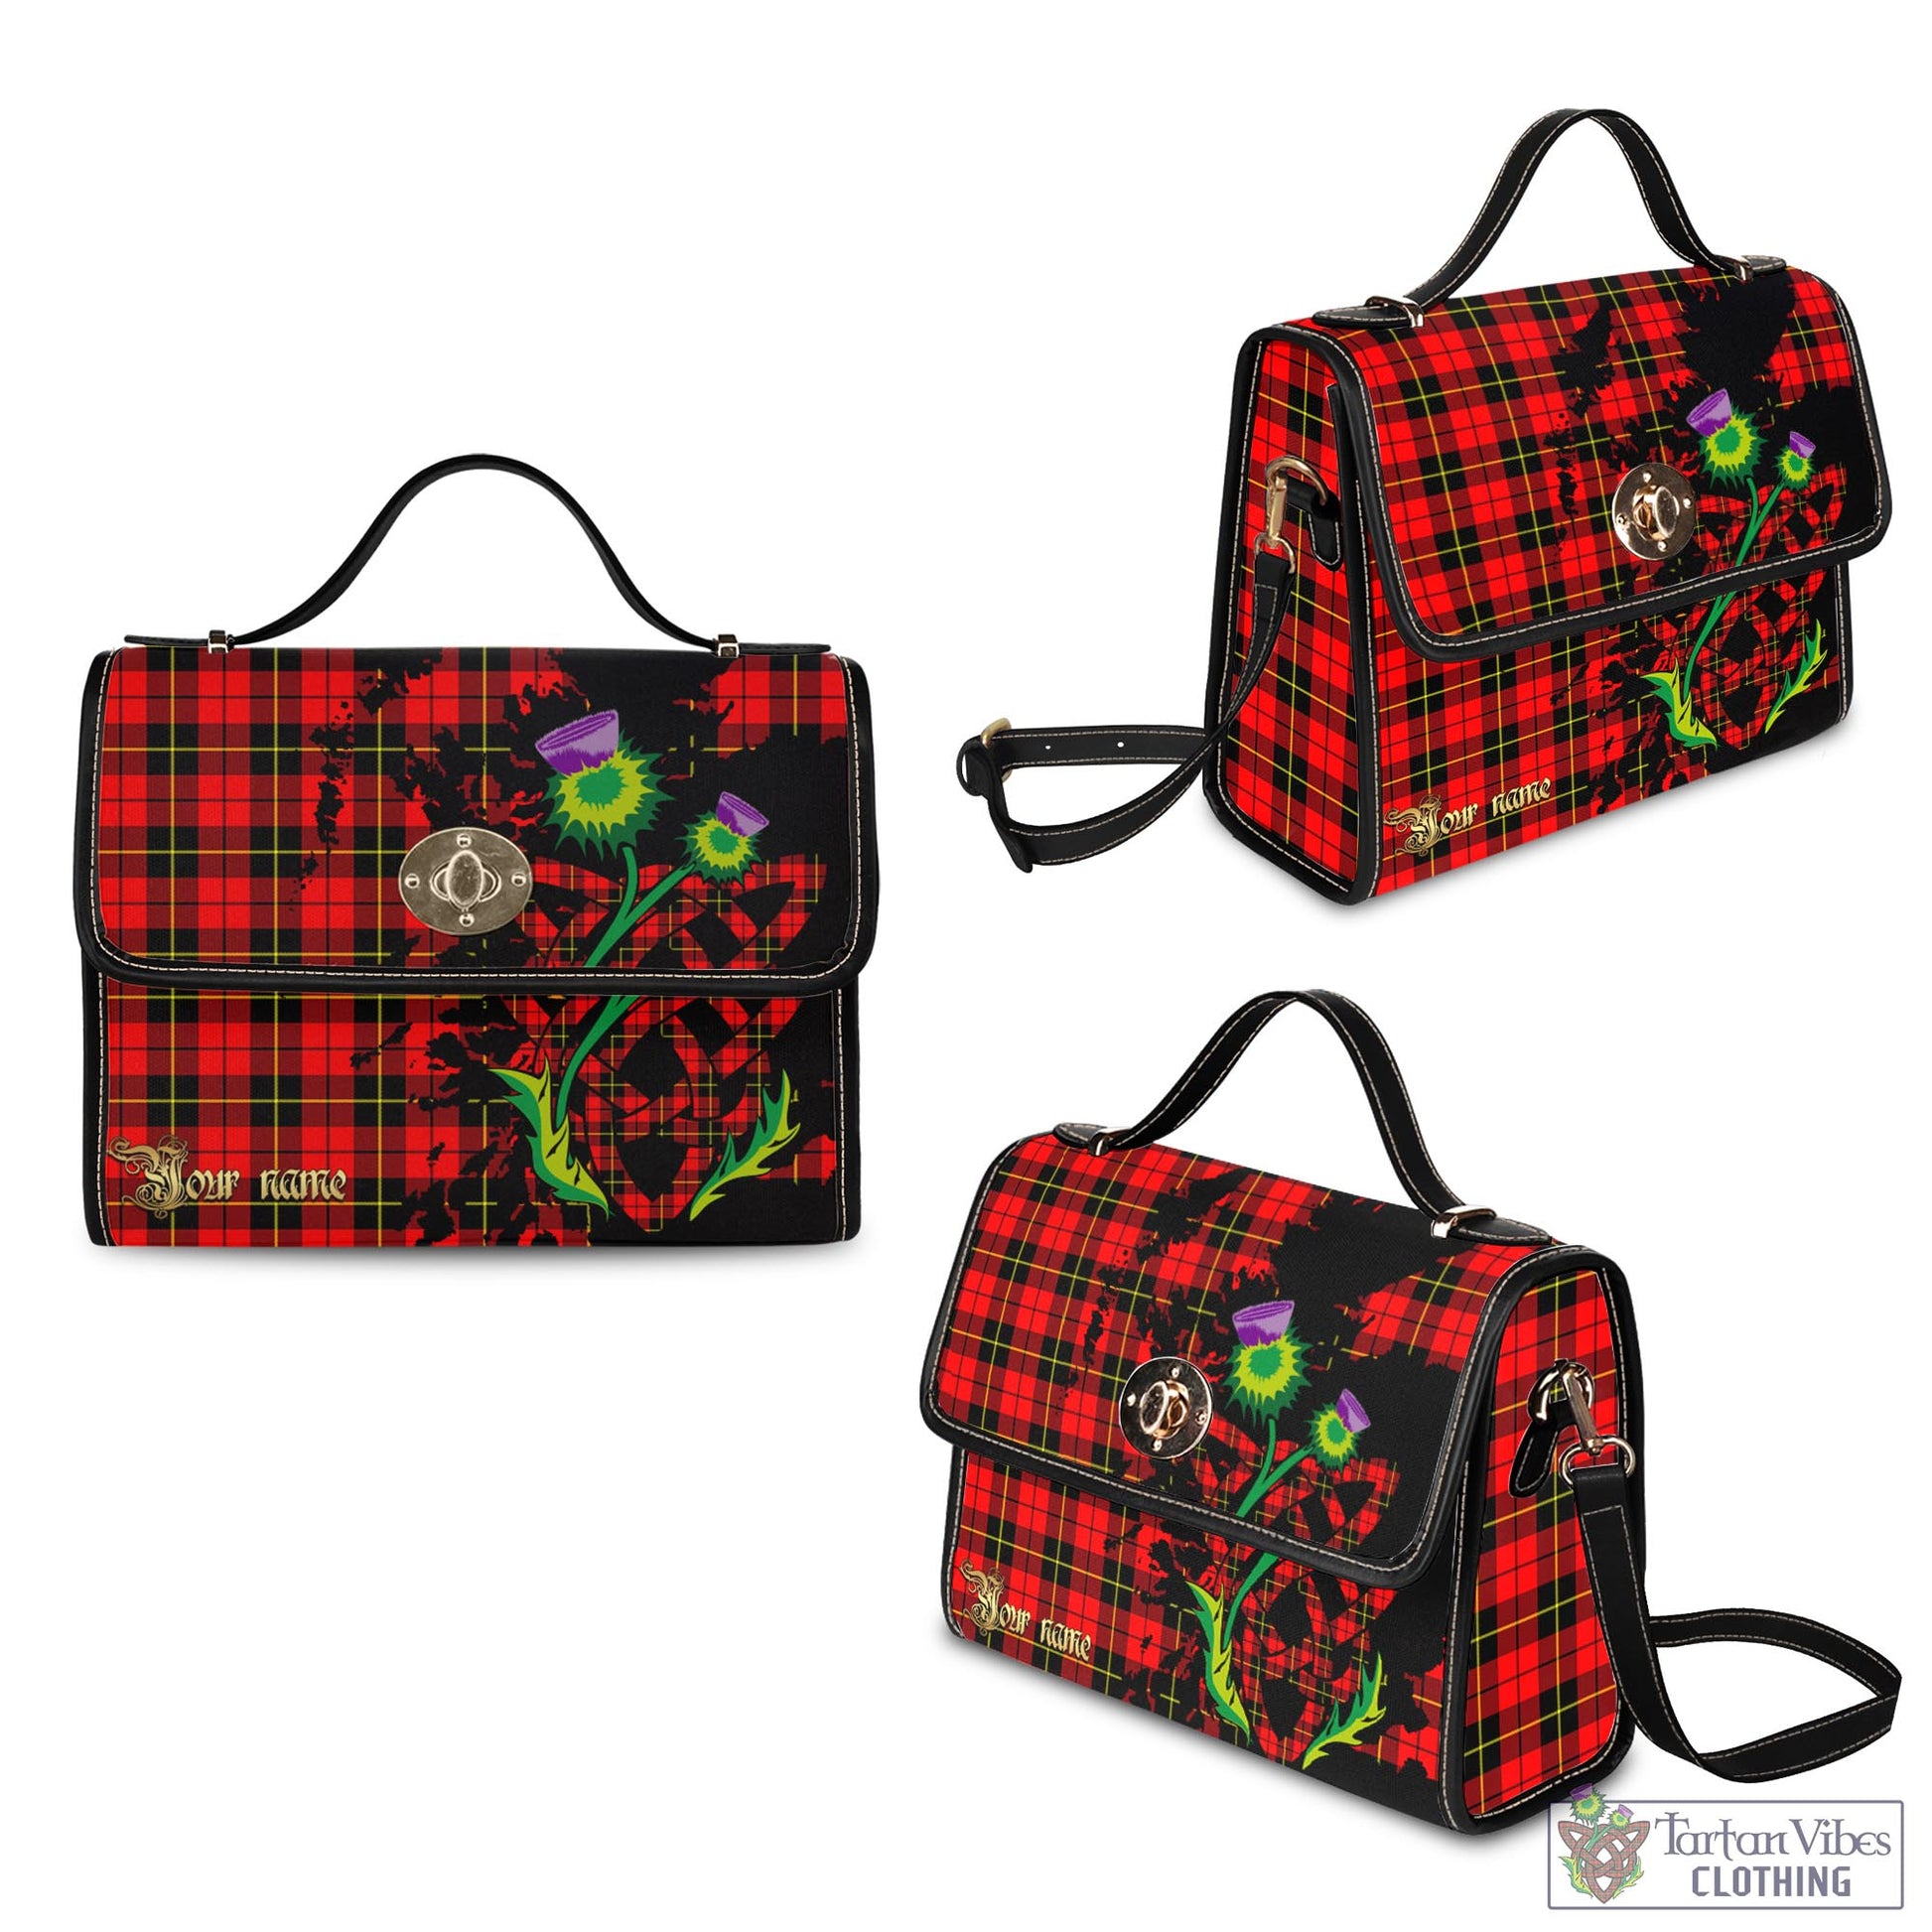 Tartan Vibes Clothing Wallace Hunting Red Tartan Waterproof Canvas Bag with Scotland Map and Thistle Celtic Accents